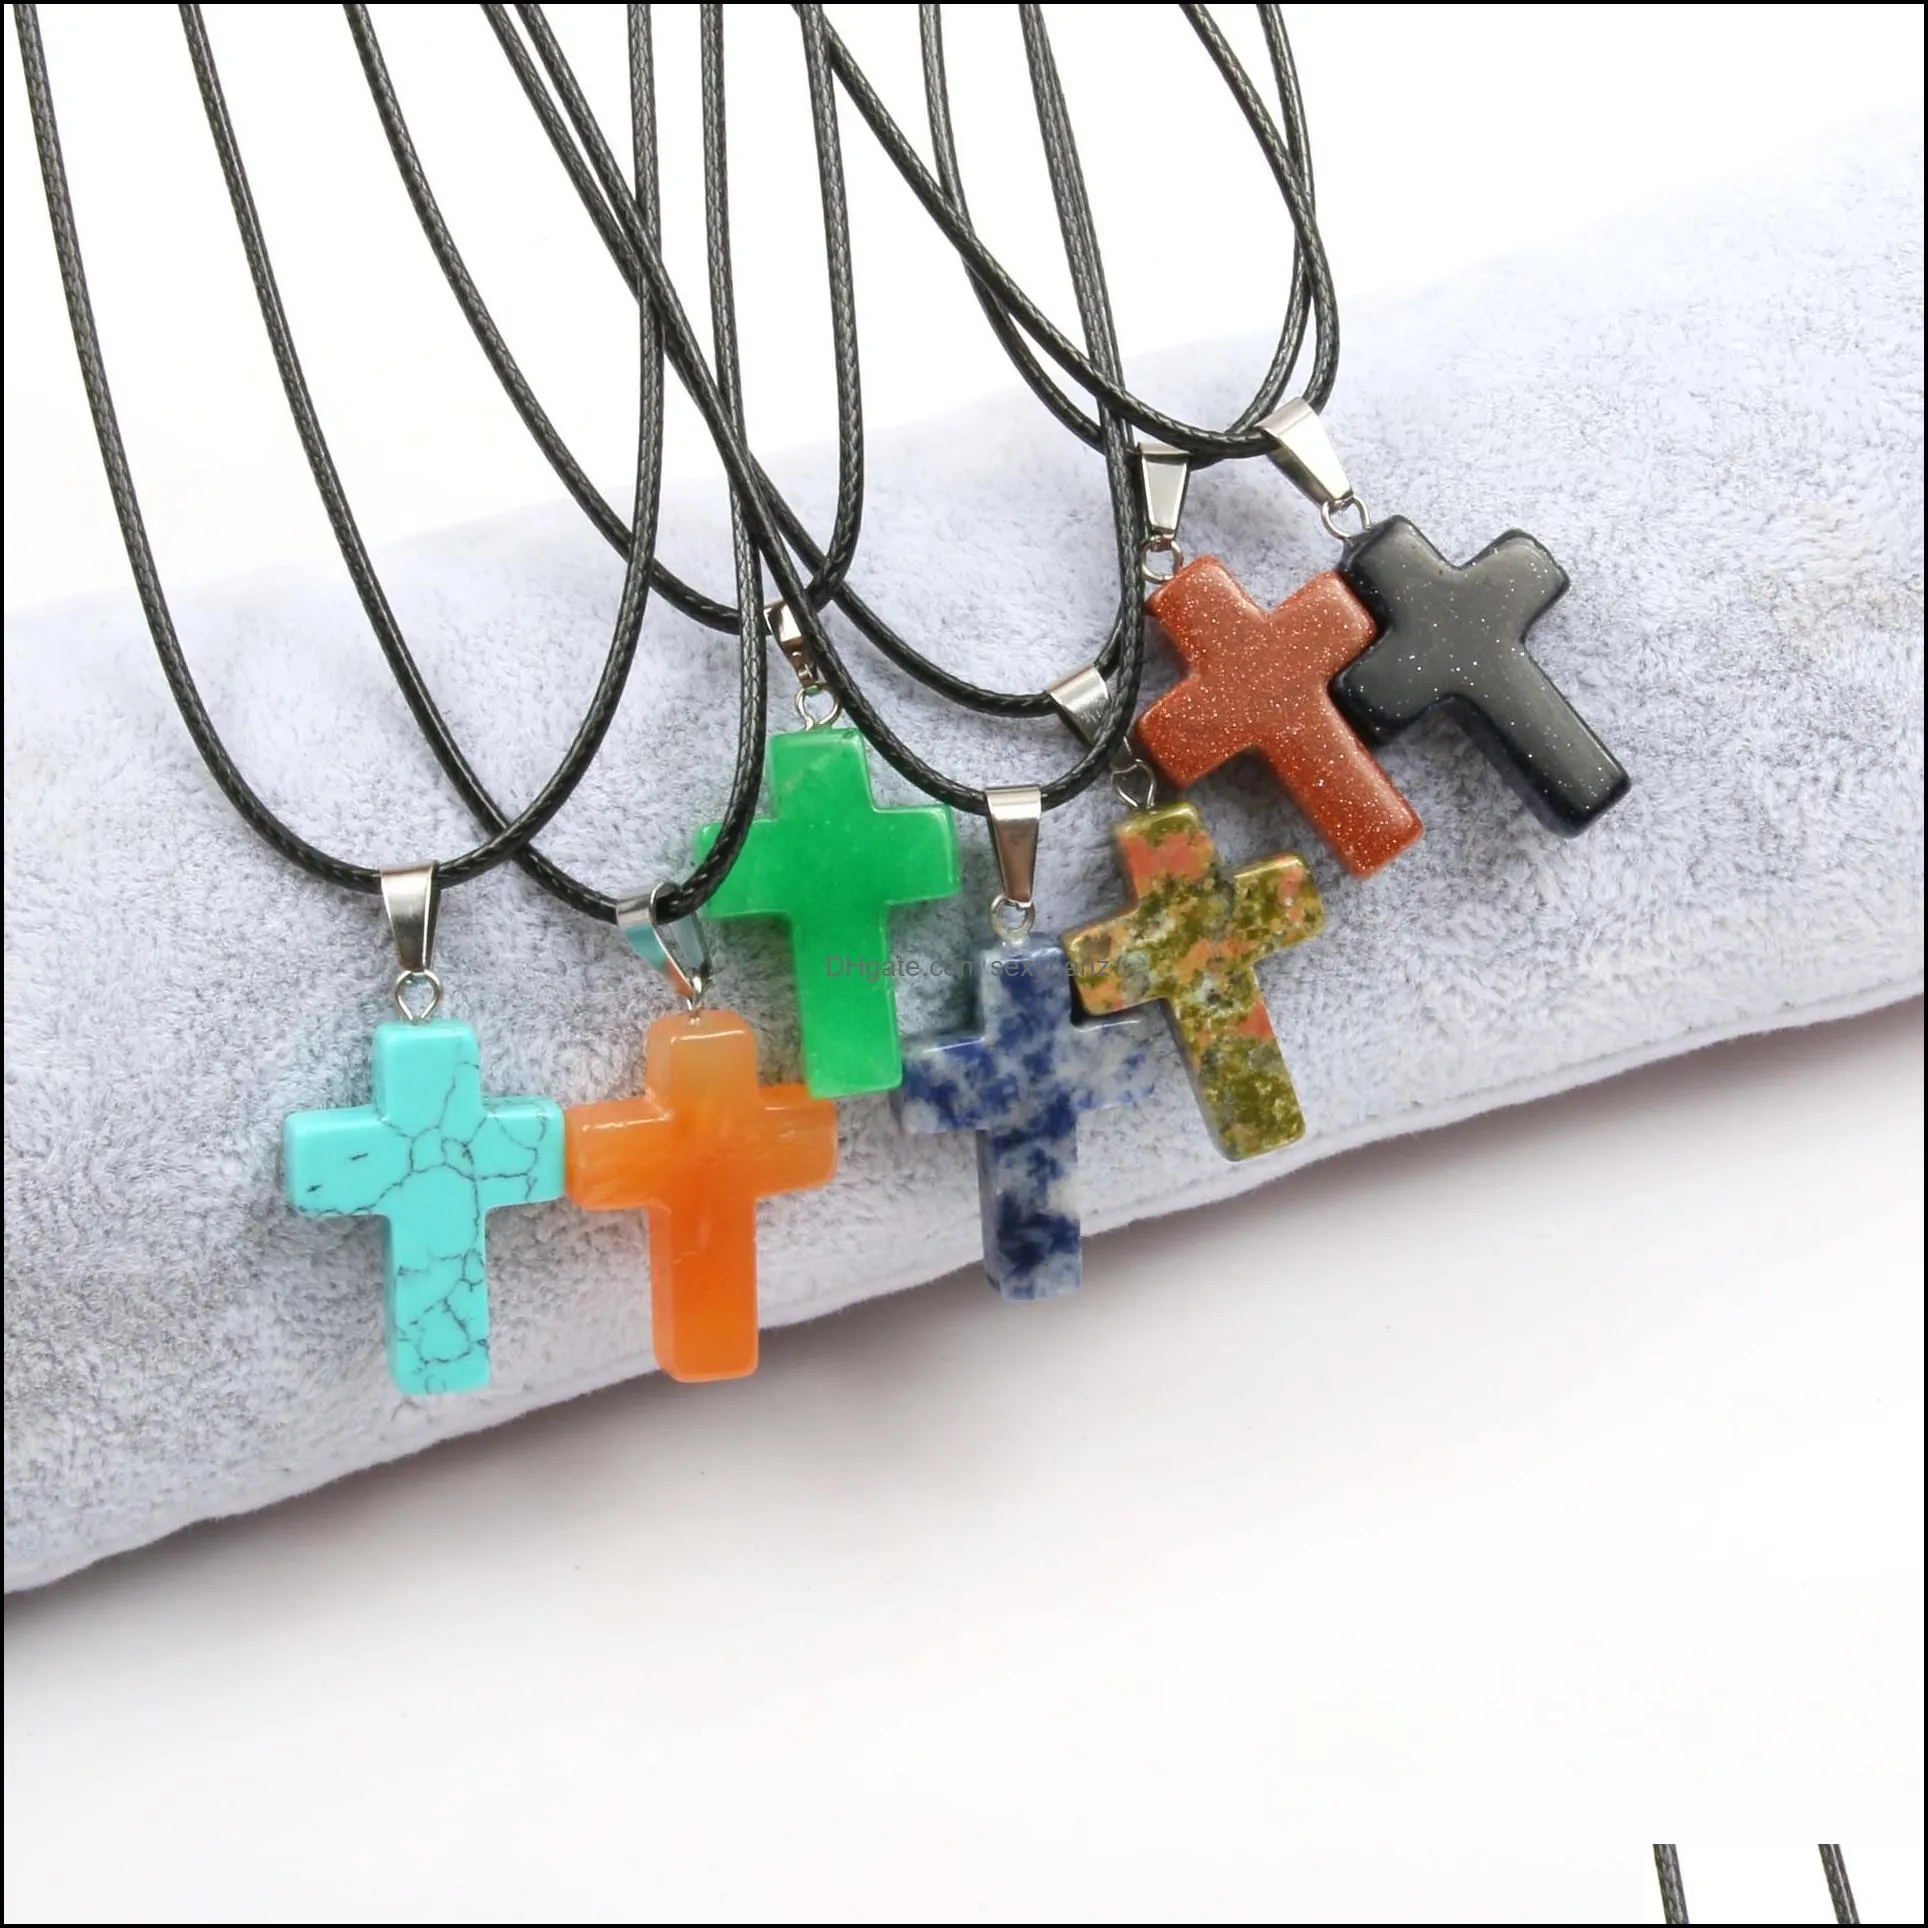 Wholesale Natural Stone Pendant Necklace Simple Cross Shape Crystal Tiger Eyes Good Quality Jewelry